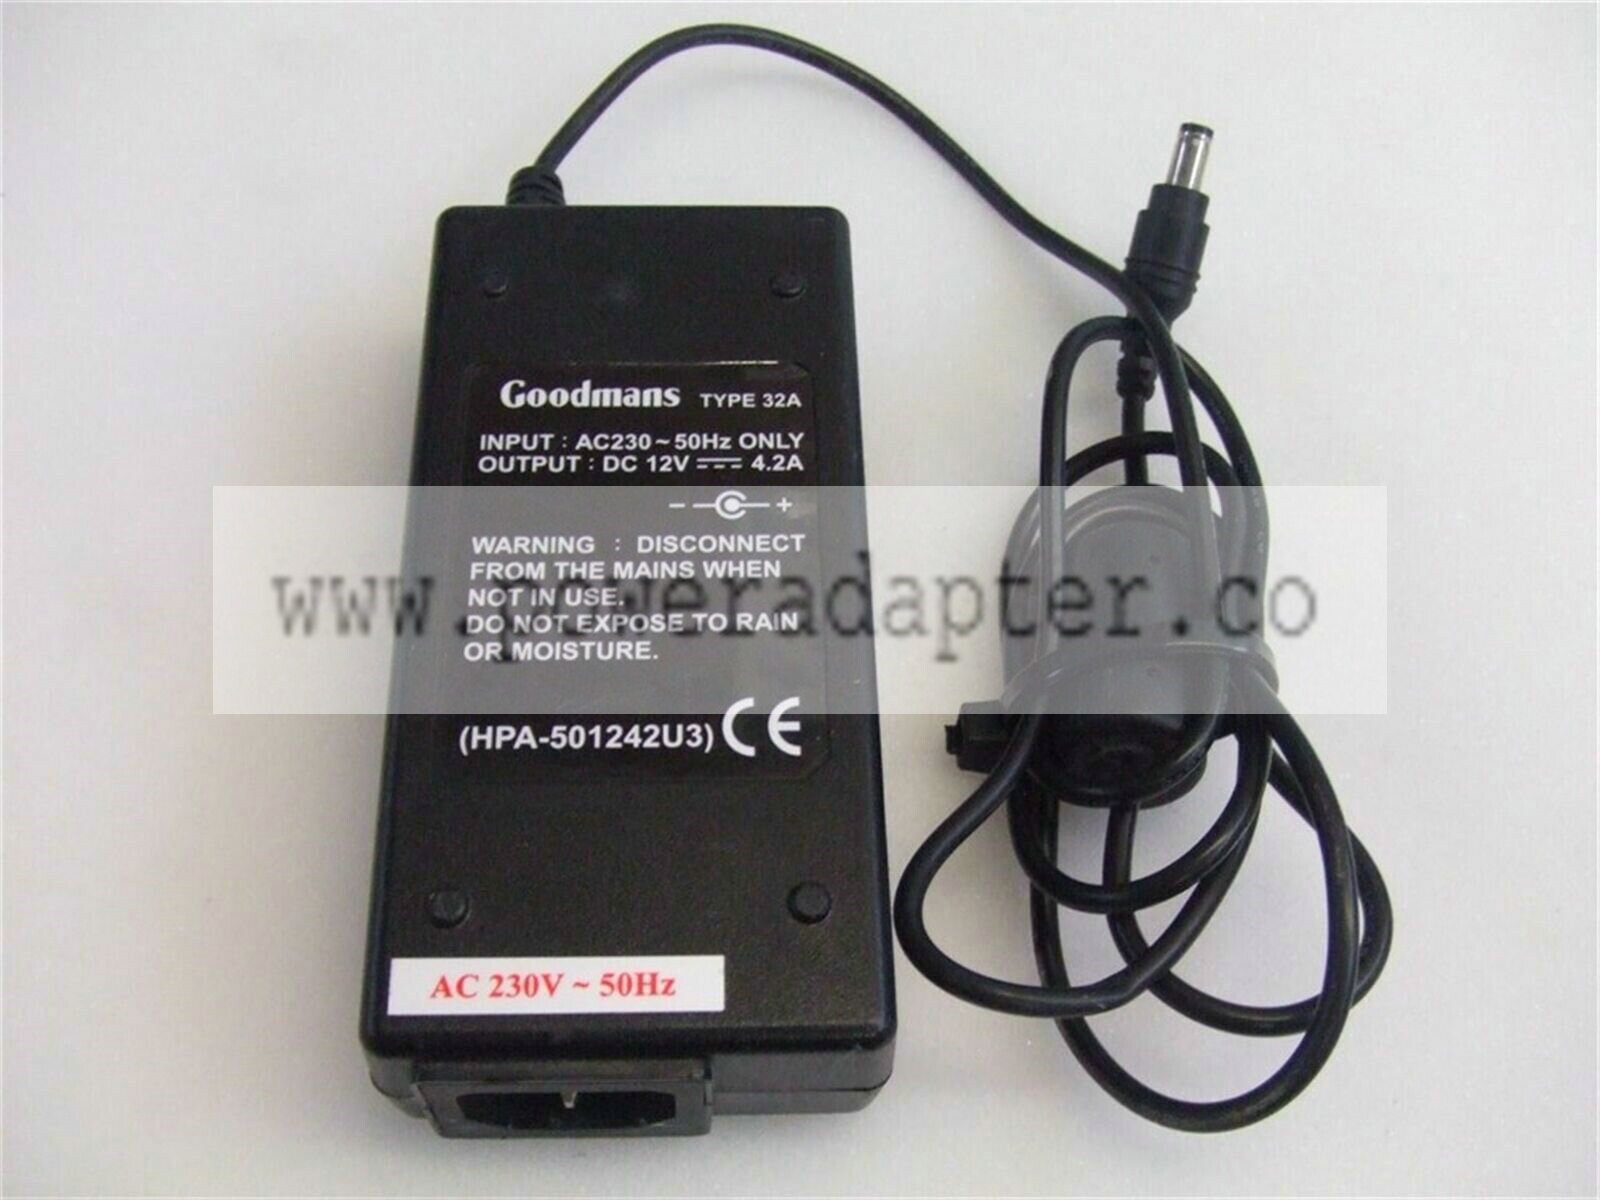 Genuine Goodmans Power Supply HPA-501242U3 12V 4.2A AC Adapter Cable Brand: Goodmans Manufacturer warranty: None MPN